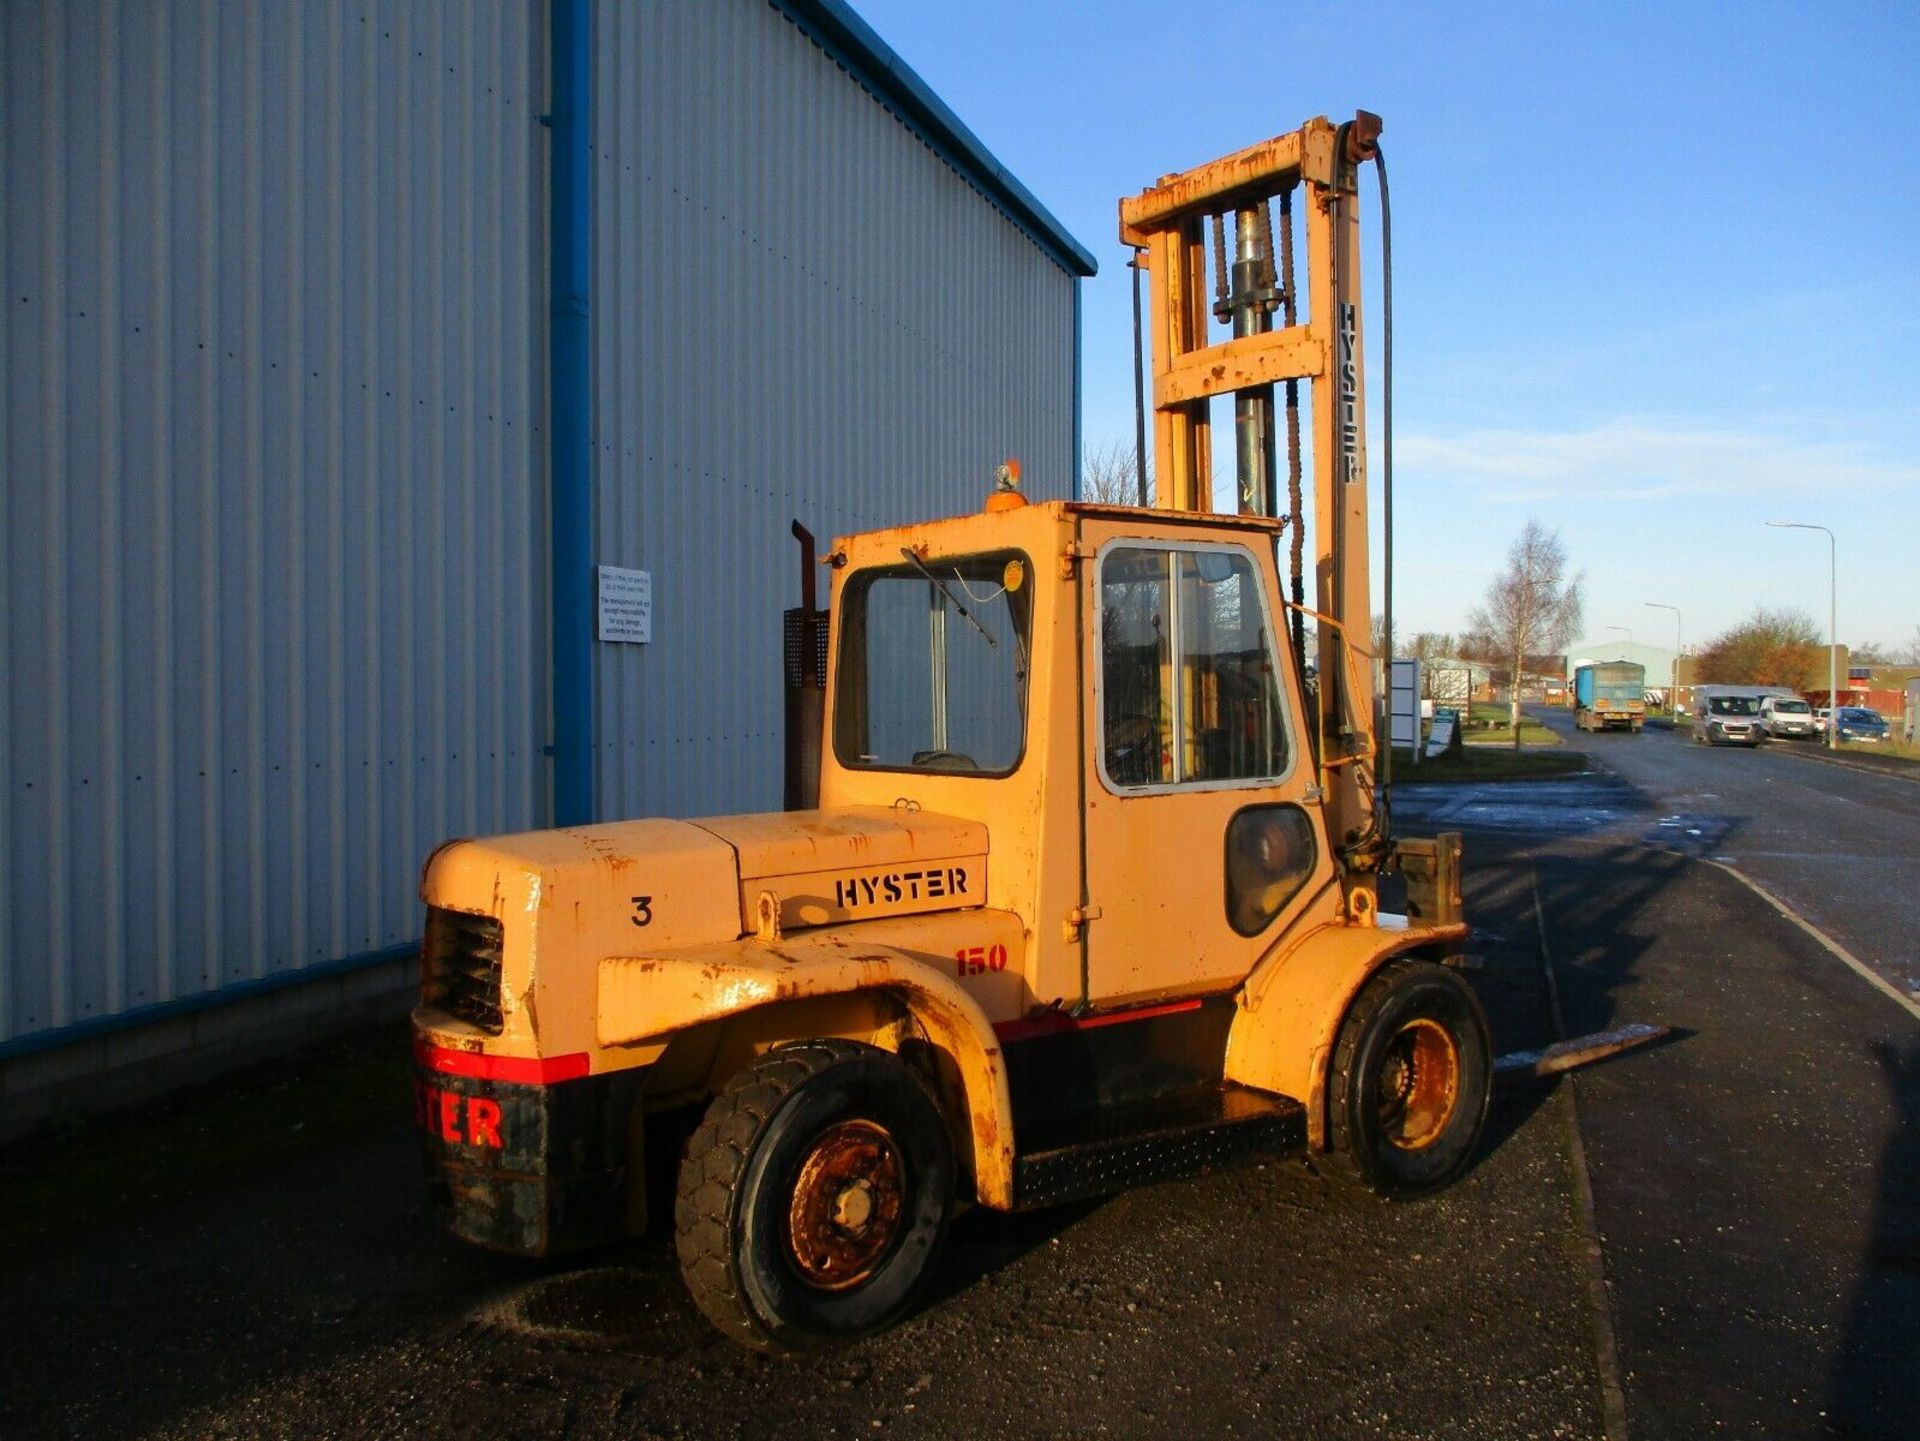 Hyster H150 fork lift diesel 7 ton - Image 7 of 7